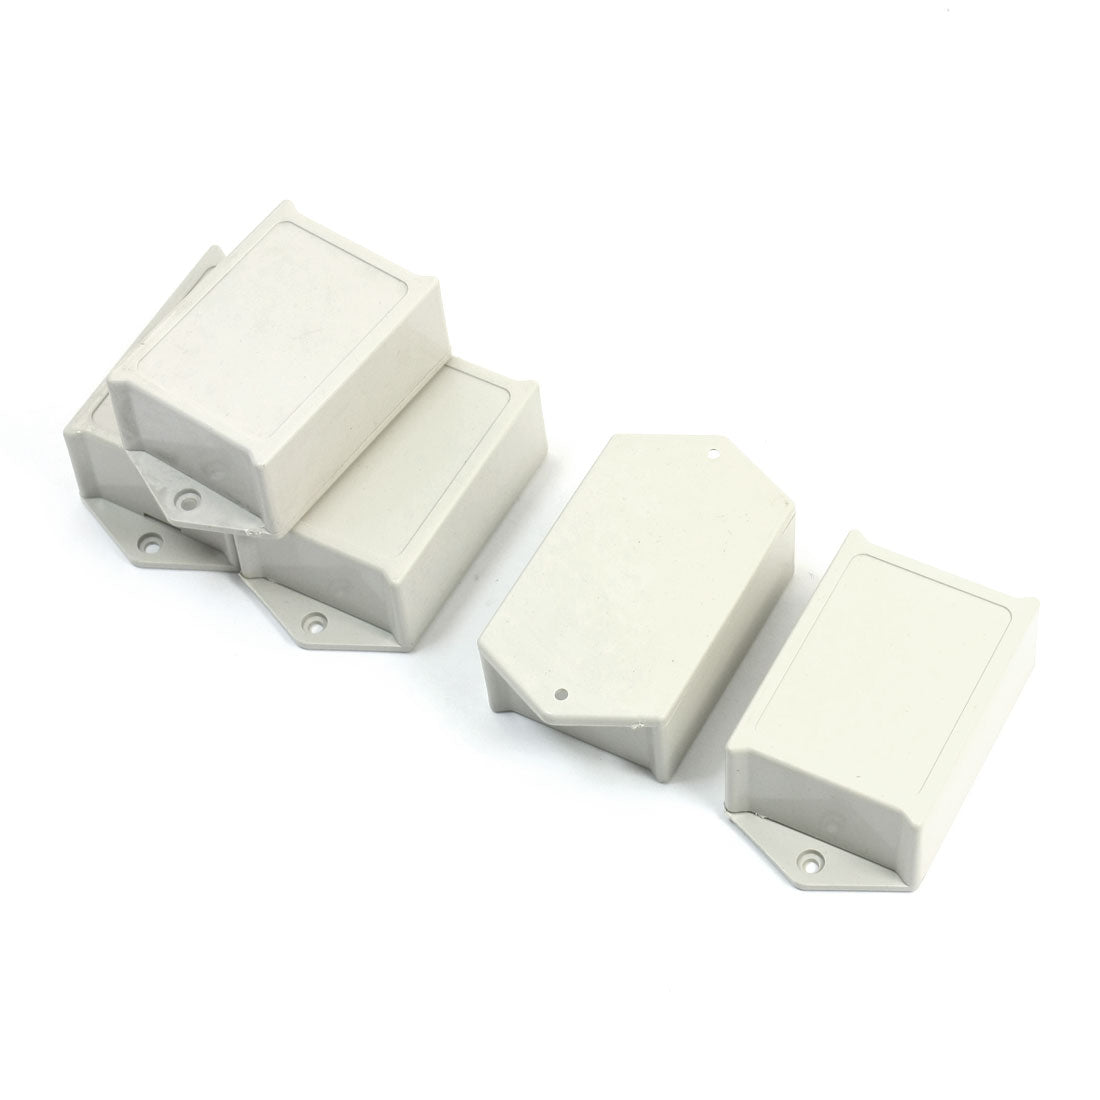 uxcell Uxcell 5pcs Gray Plastic Project Power Protector Case Junction Box 60x45x28mm